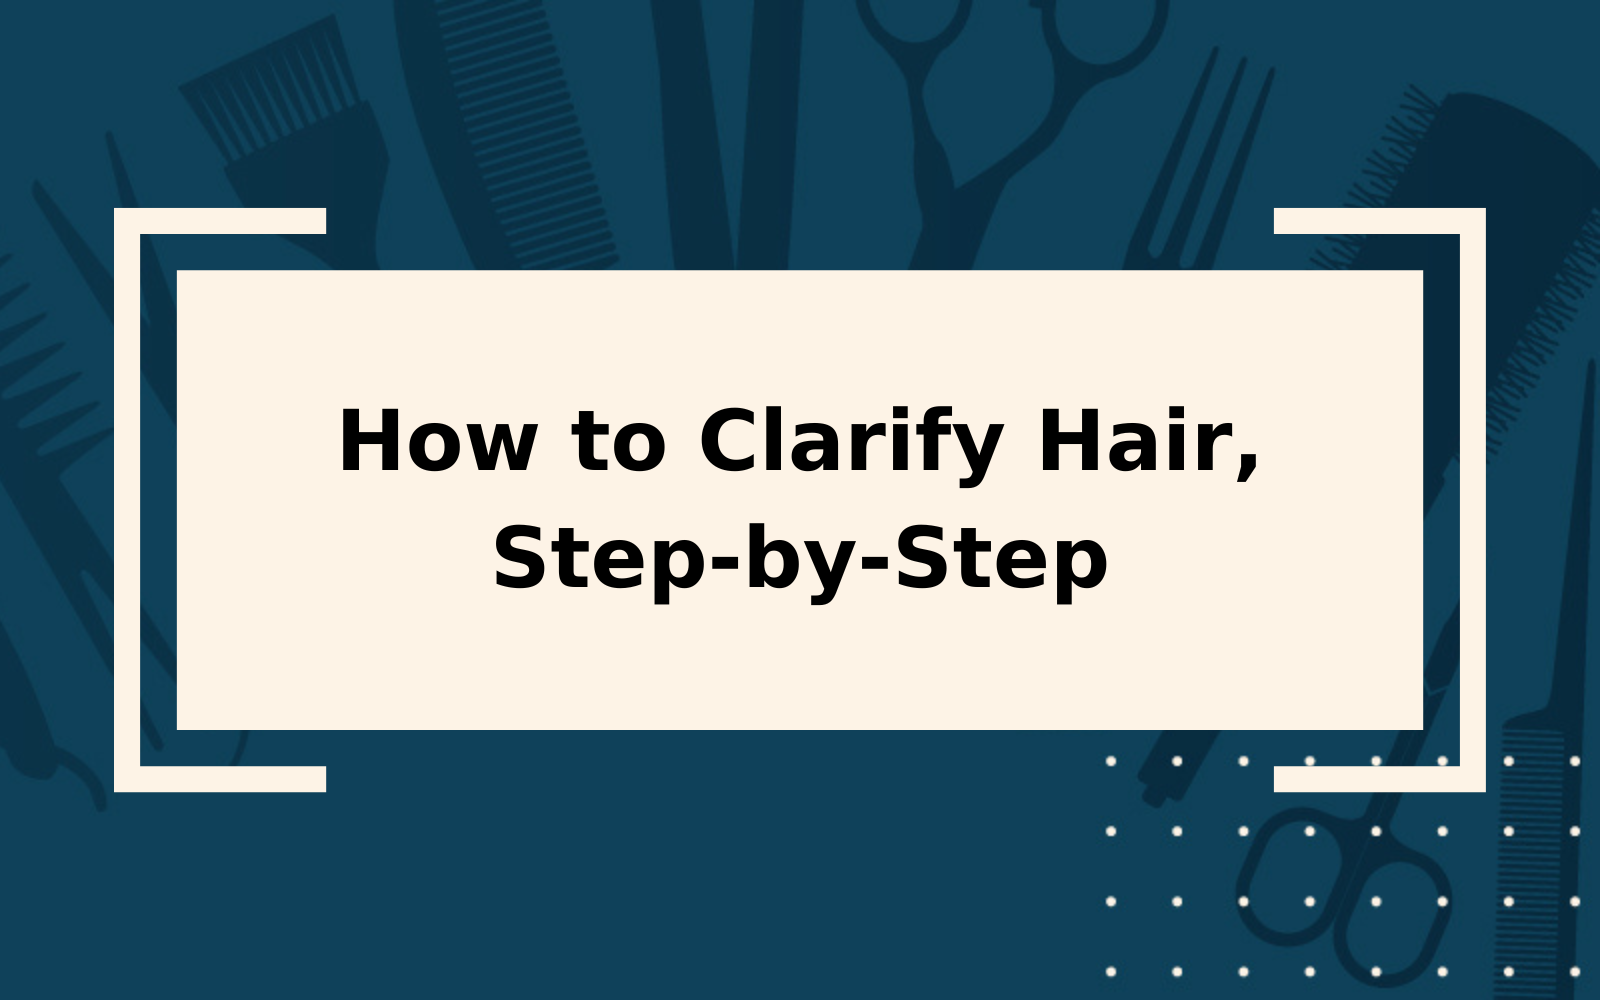 How to Clarify Hair | Your Step-by-Step Guide